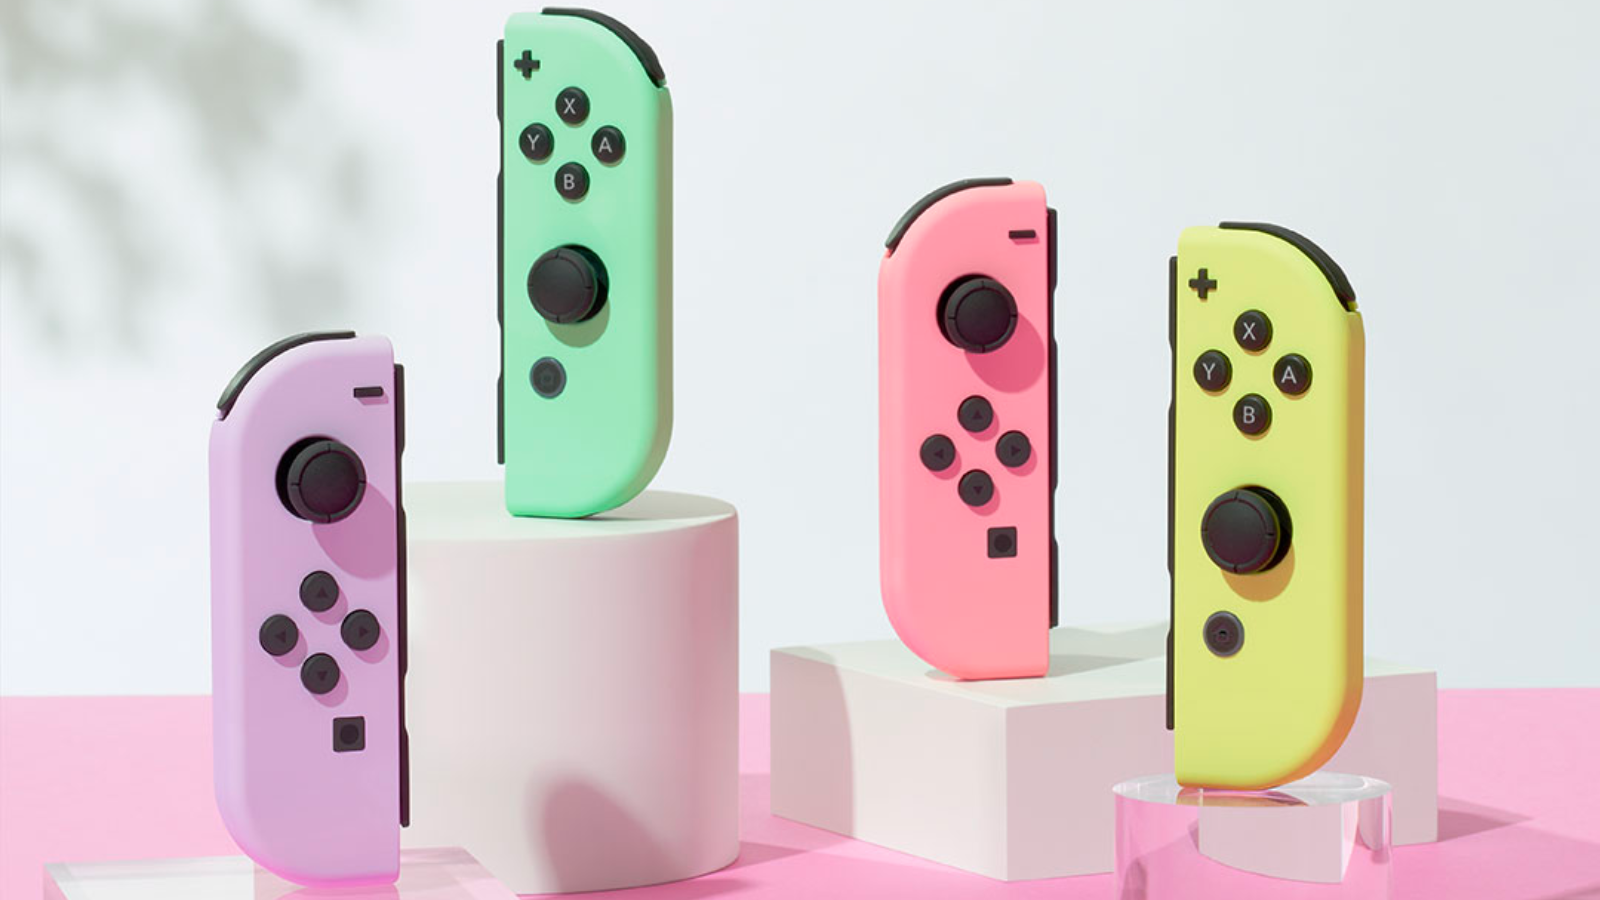 the pastel nintendo switch joy-cons upright on white and clear stands against a pink backdrop